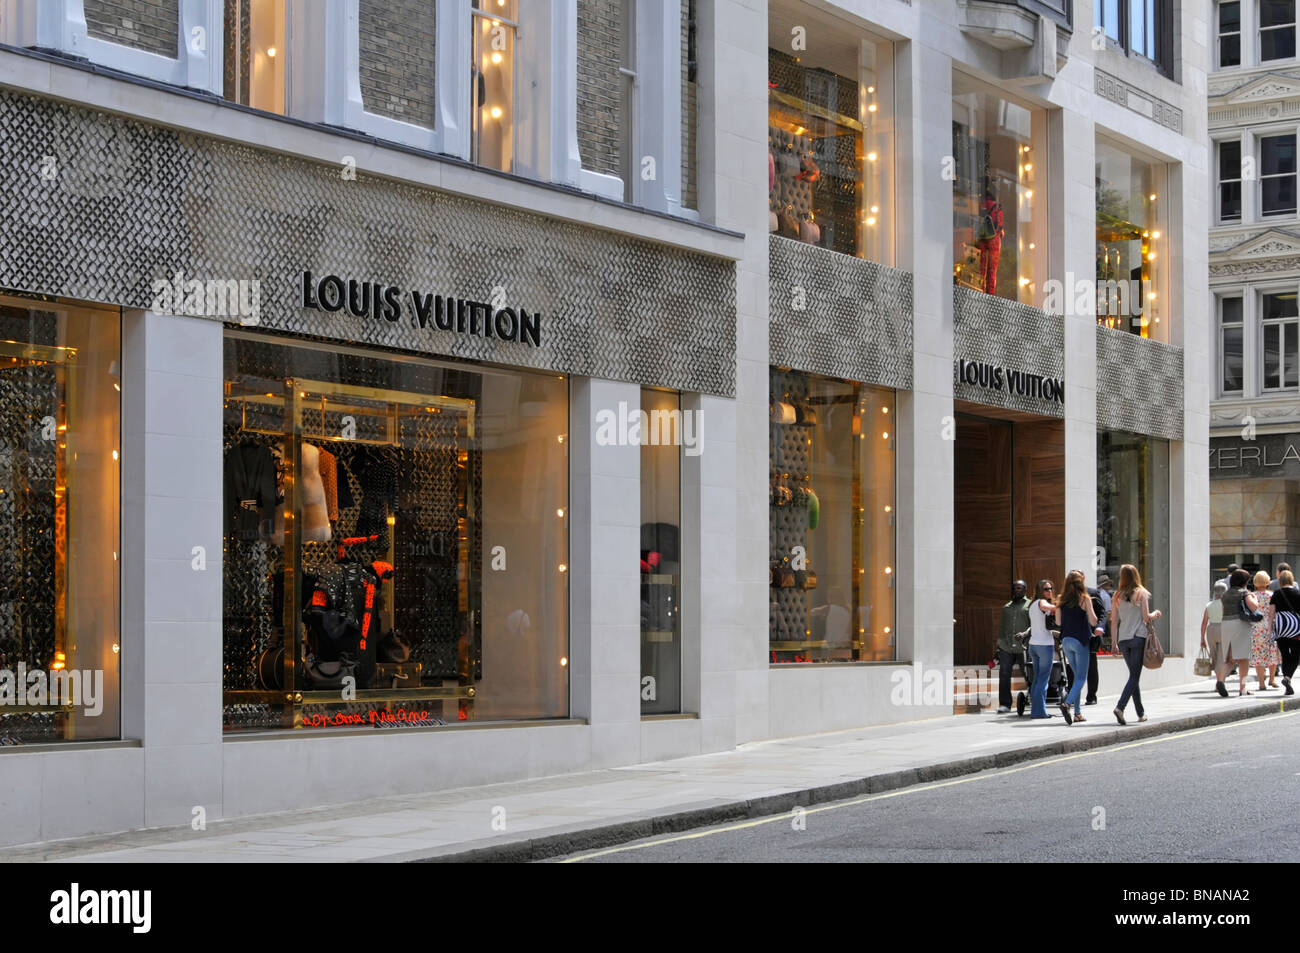 Louis Vuitton Store Front in London Stockfoto